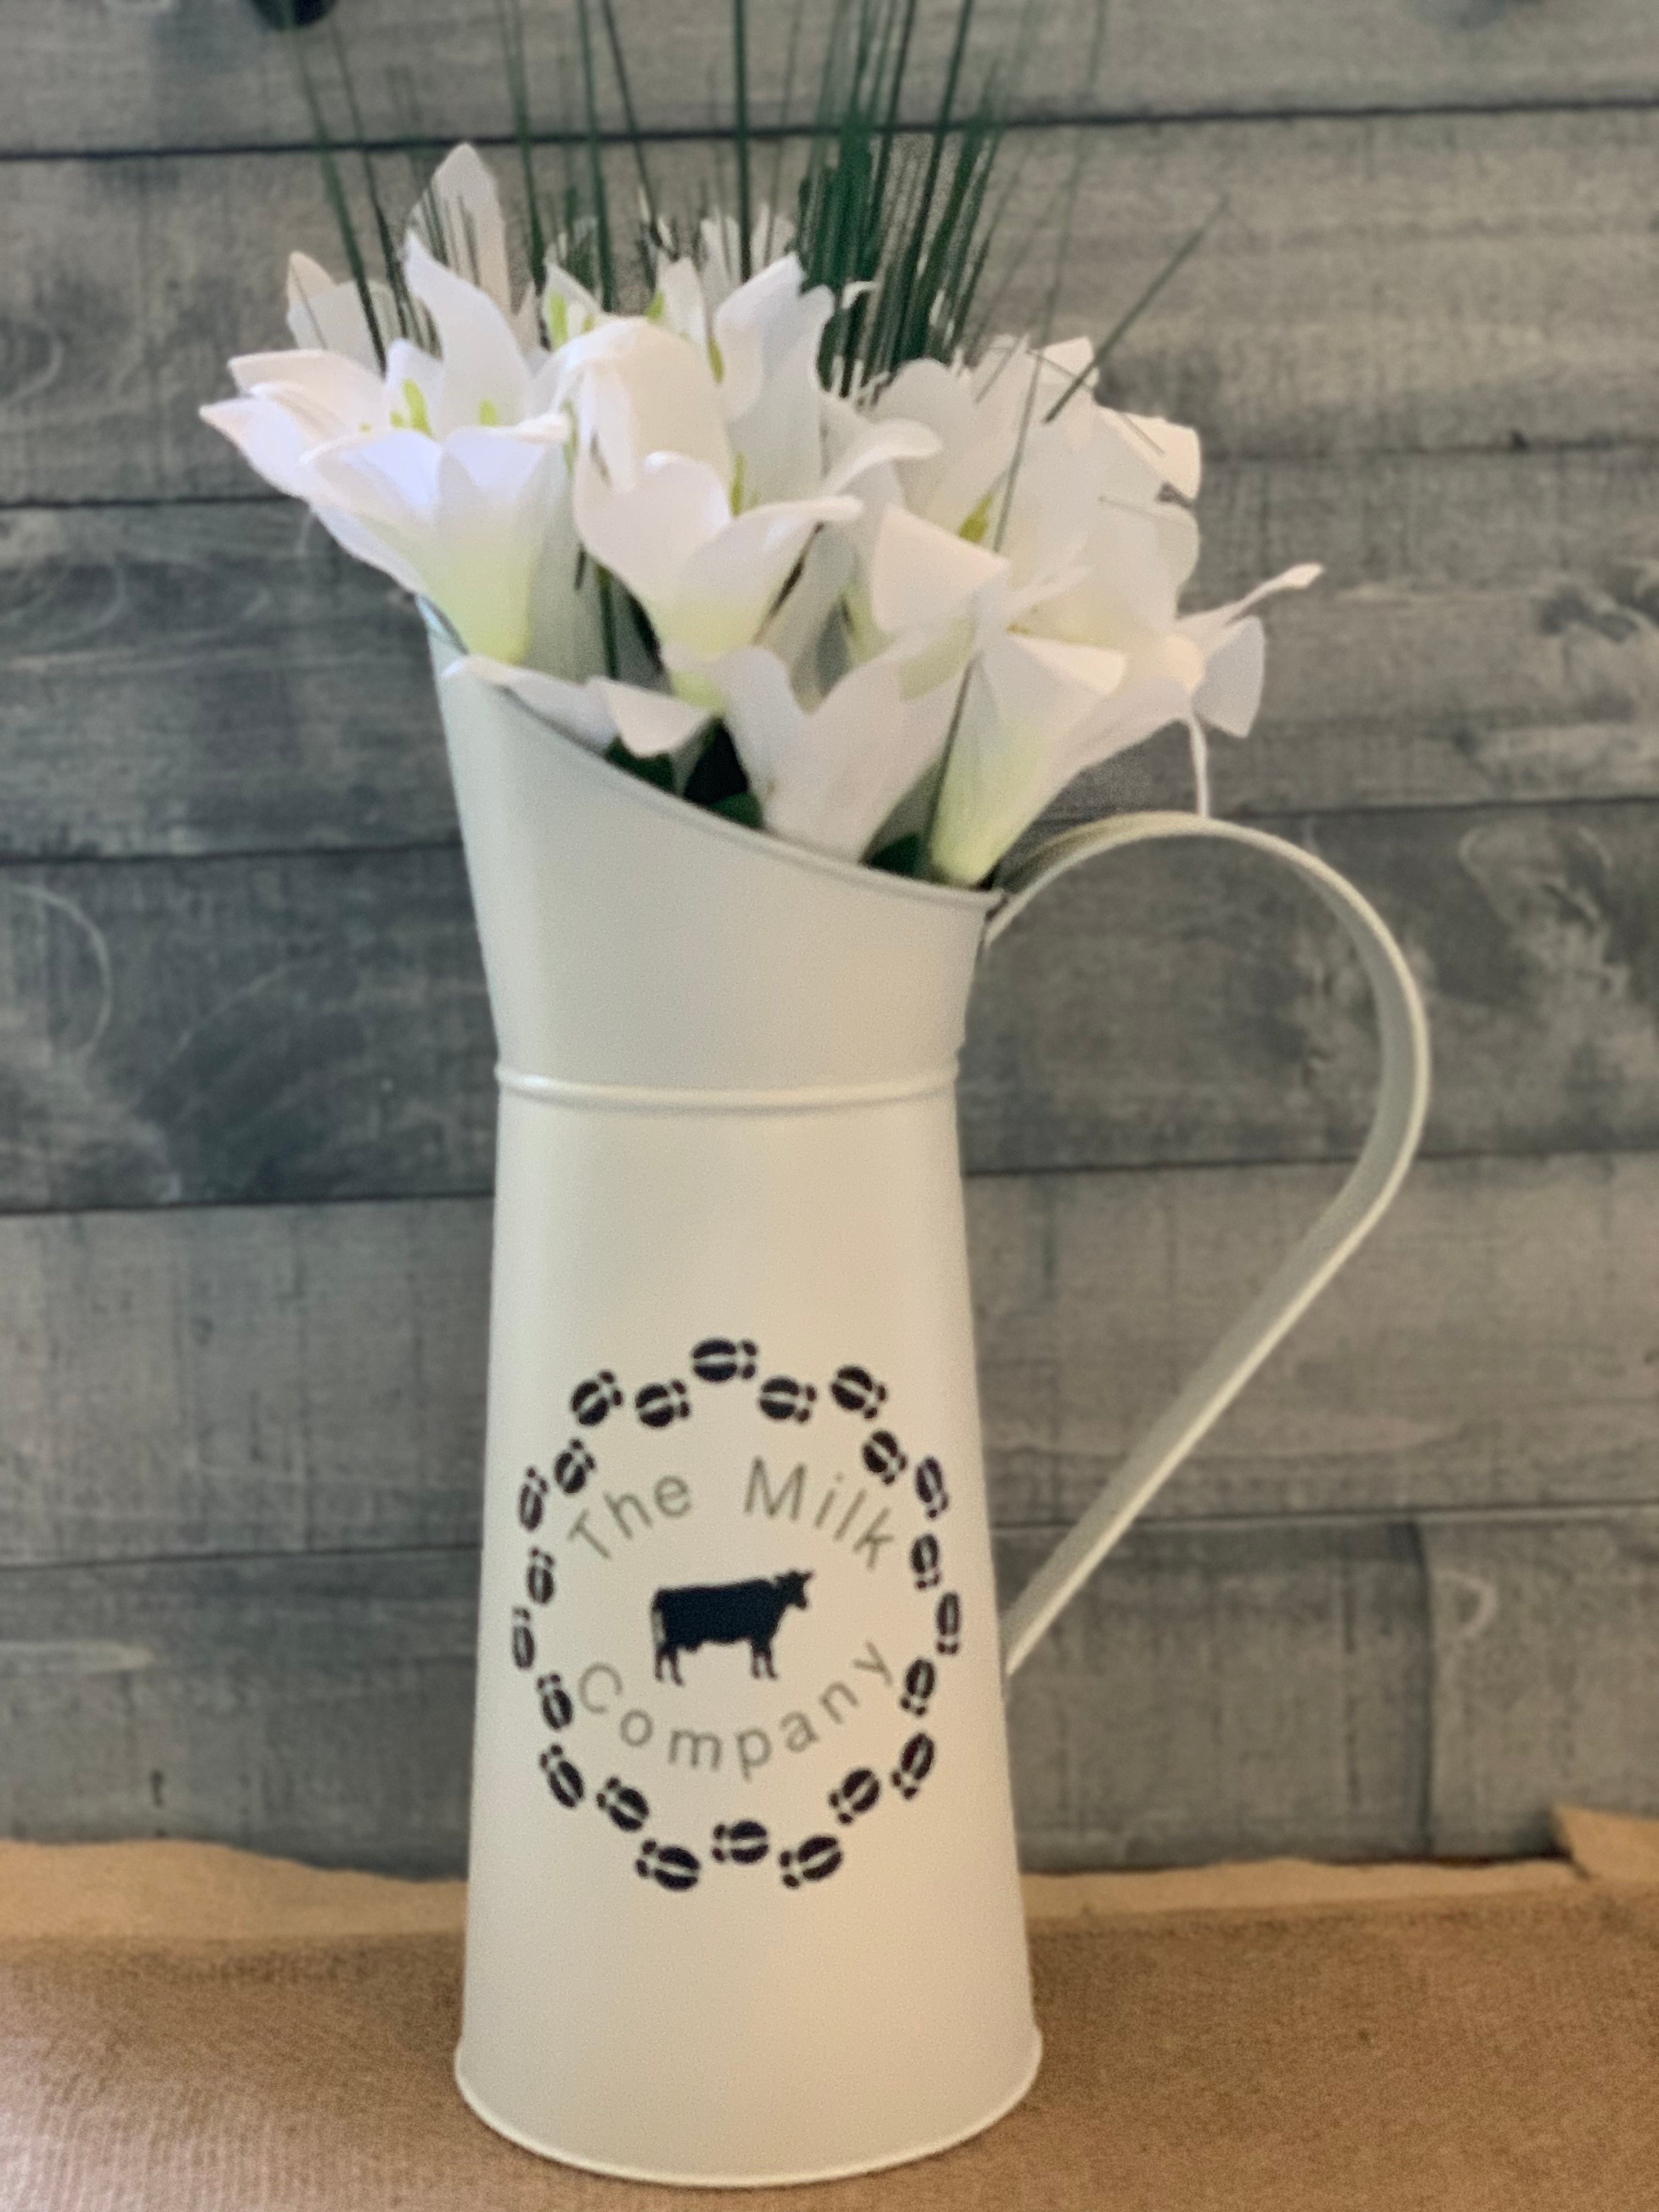 Vintage White Metal Milk Pitcher shows image sitting on a table with a floral arrangement.  Flowers not sold with pitcher.